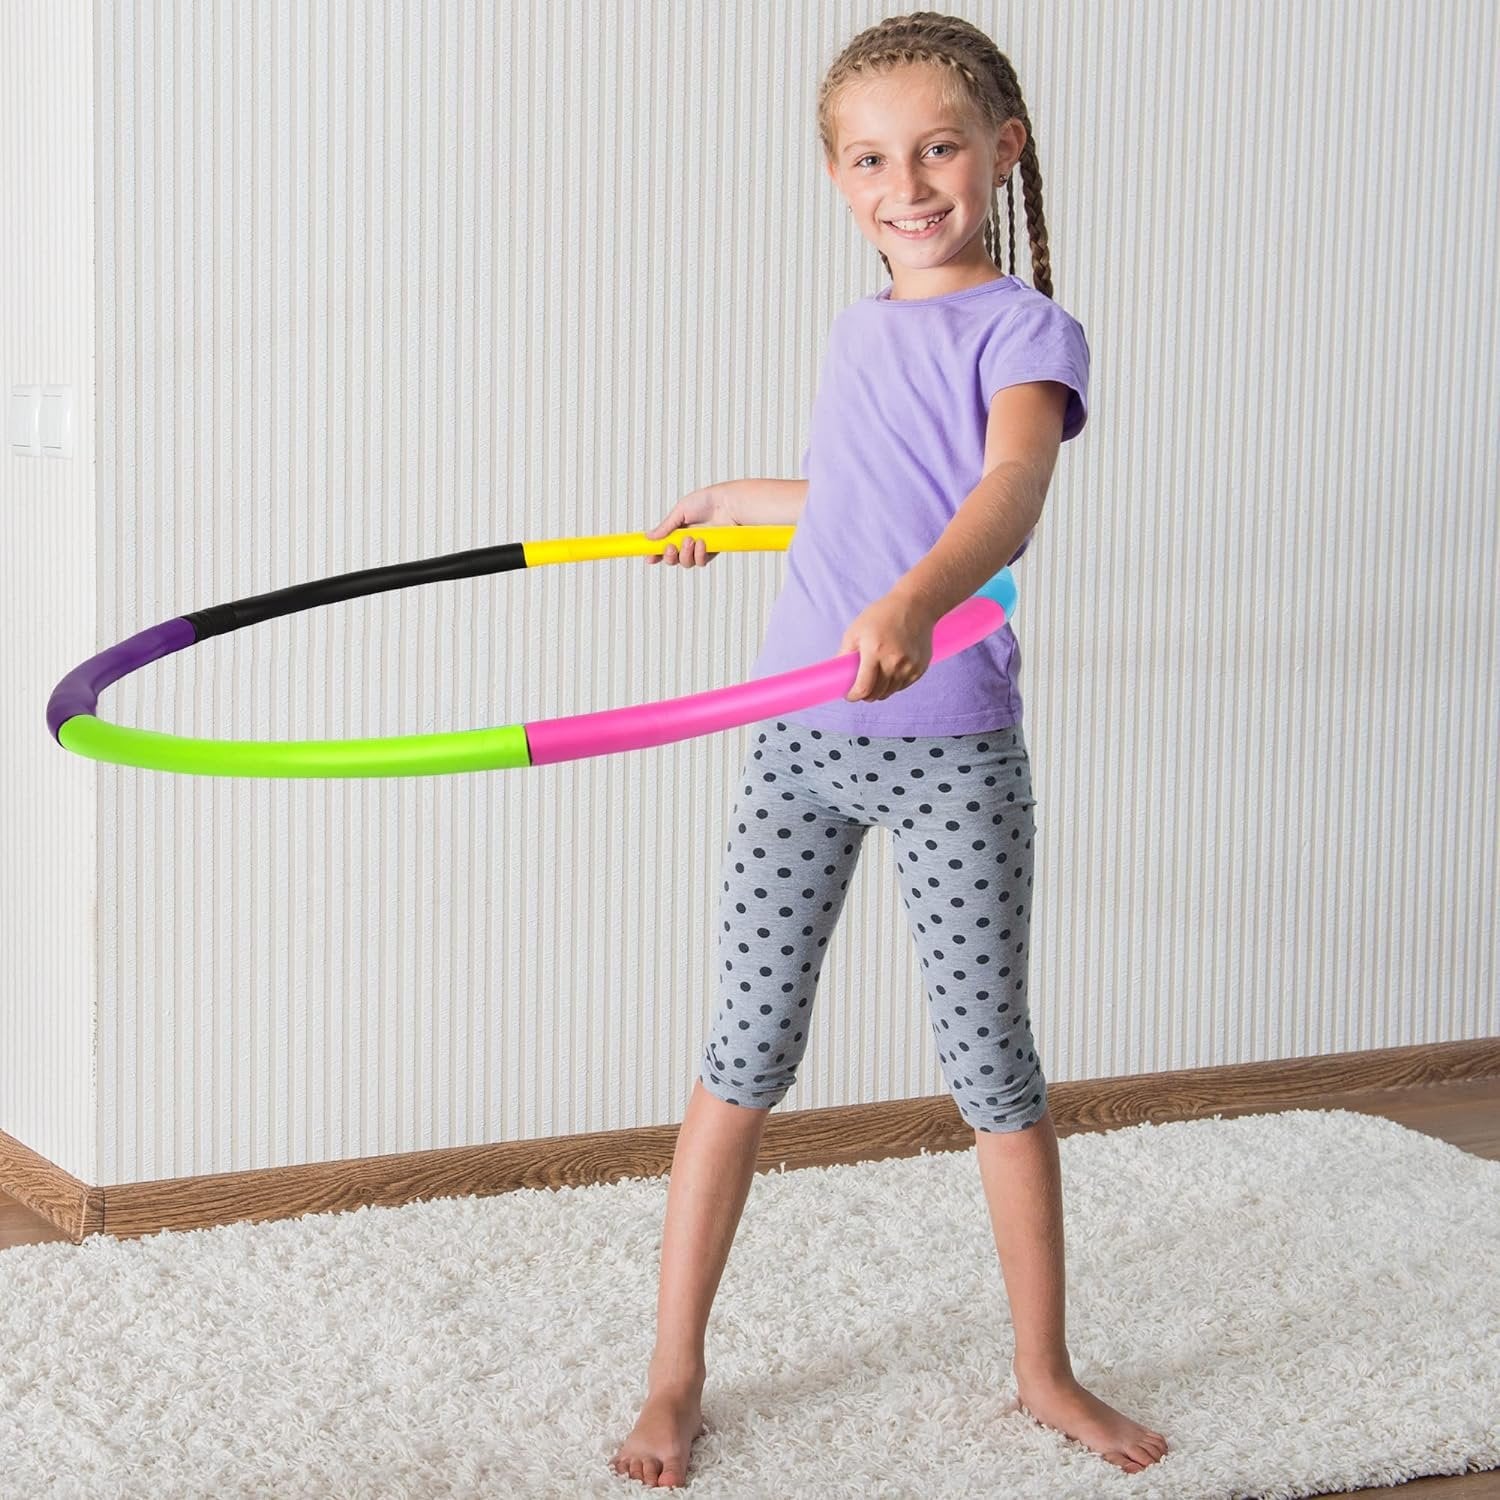 Weighted Hula Hoop for Kids - 2lb Weighted Hoola Hoop Toy for Exercise, 6 Section Detachable Hoola Hoops, Soft Padded & Portable, Kids’ Exercise Equipment & Outdoor Toy for Fun Workouts